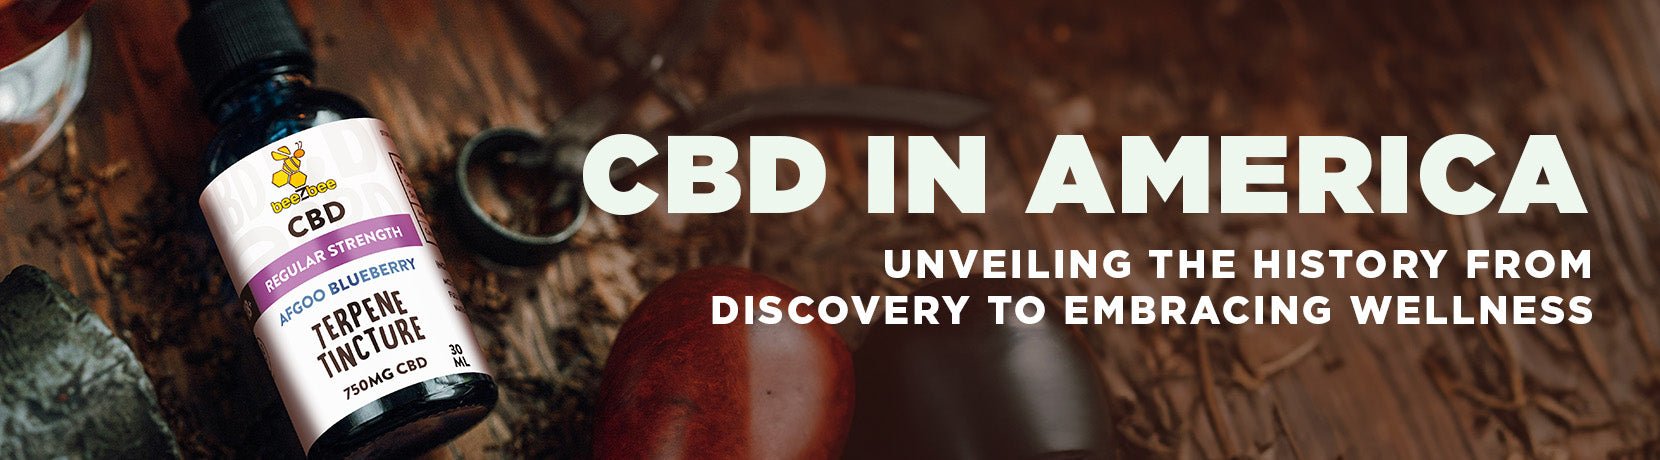 CBD in America: Unveiling the History From Discovery to Embracing Wellness - Shop CBD Kratom